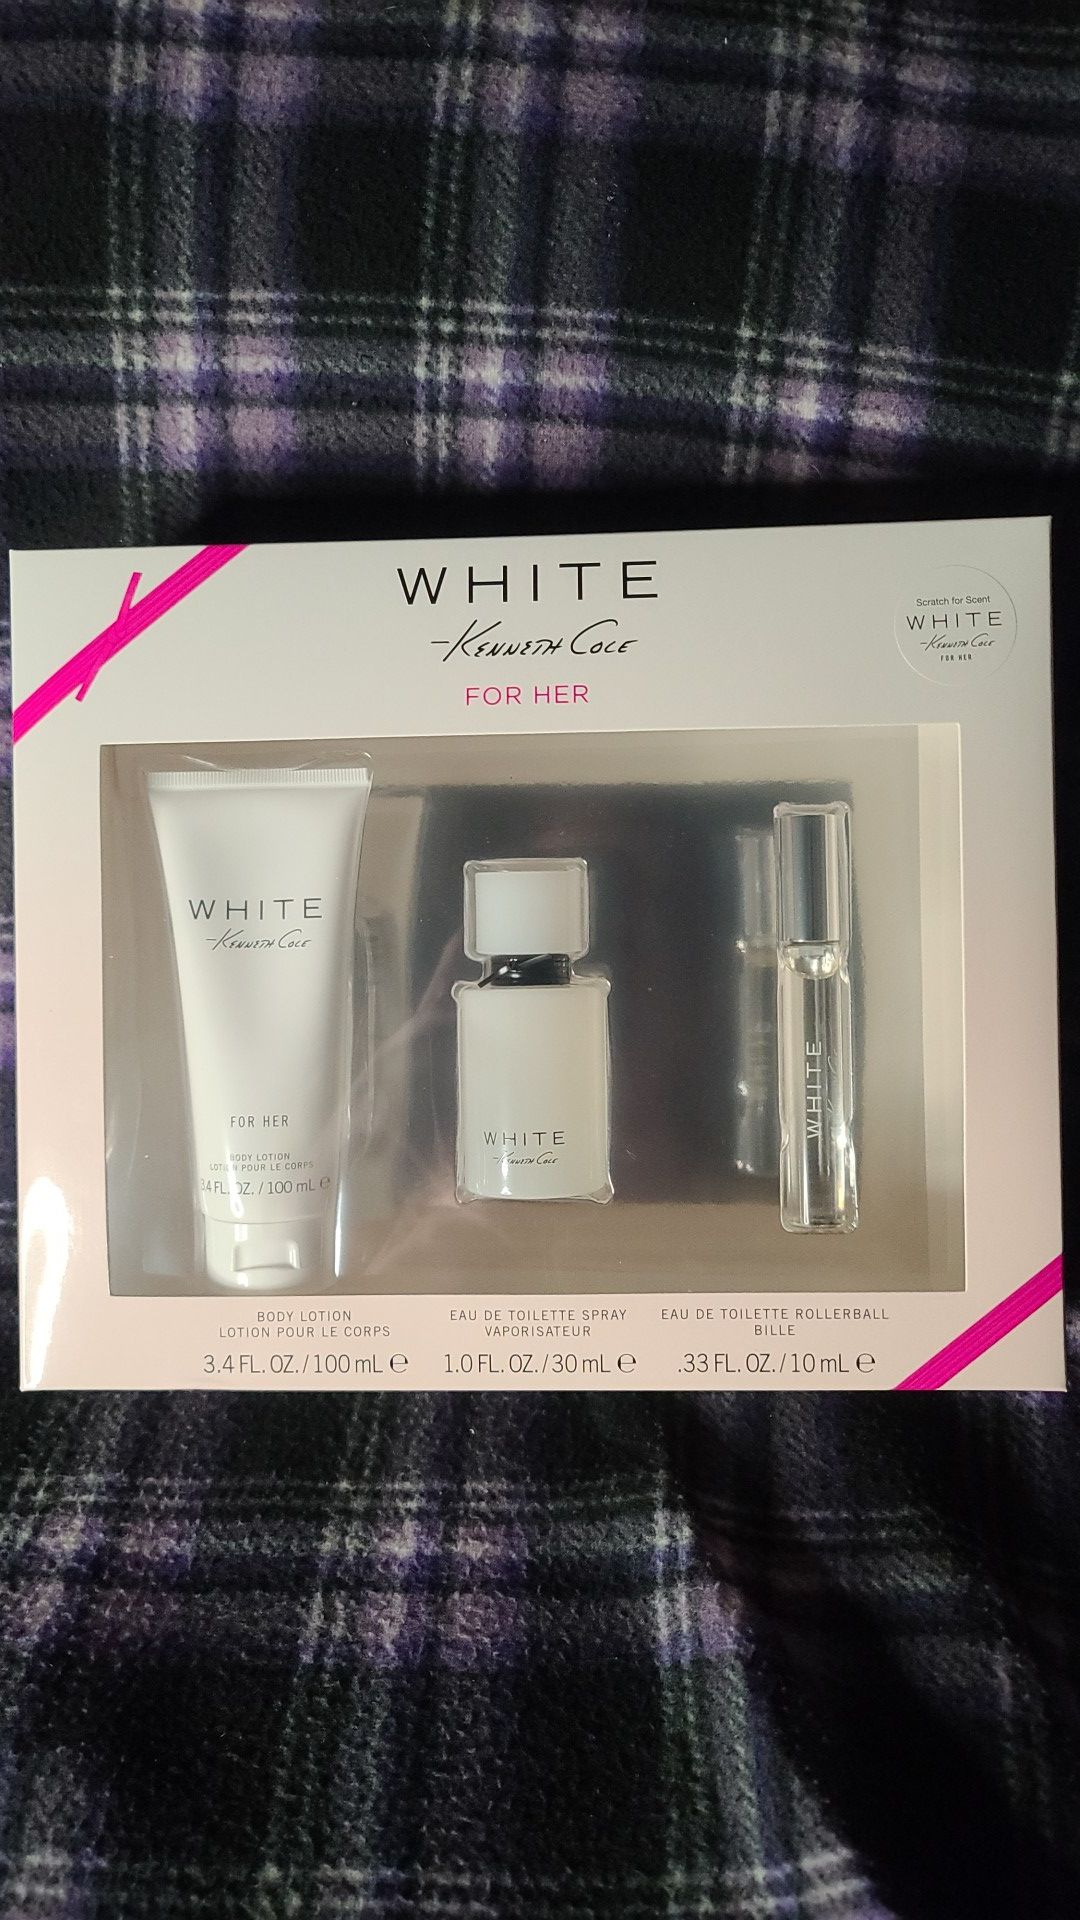 White for Her gift set by Kenneth Cole